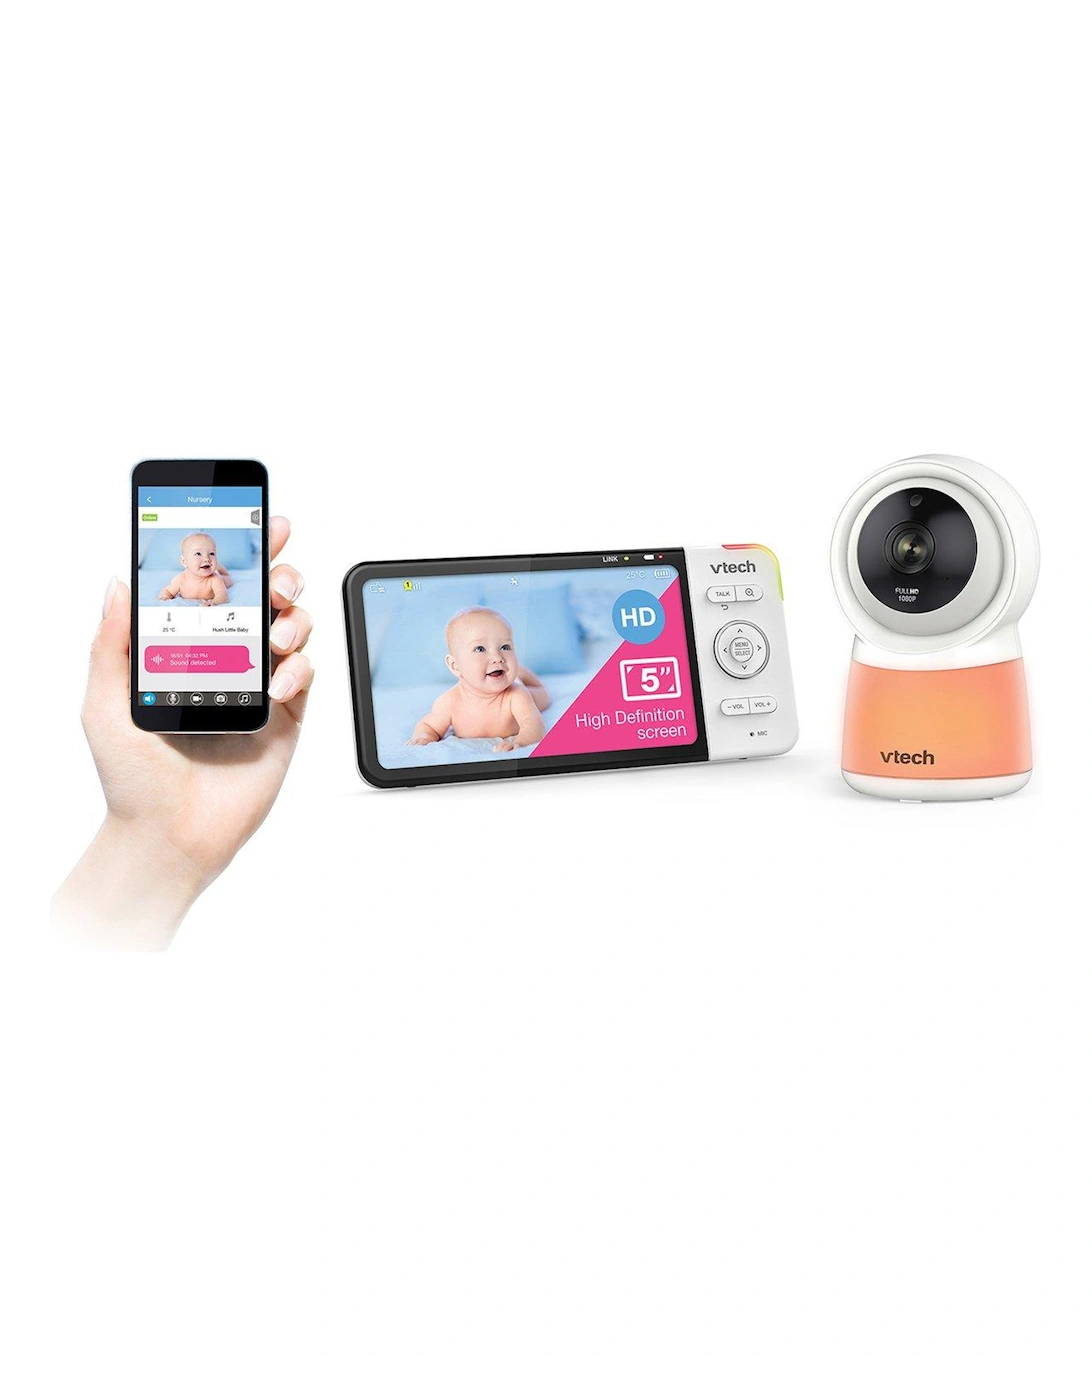 Smart 5-inch Hd Screen Wi-Fi Baby Video Monitor with Night Light, 2 of 1